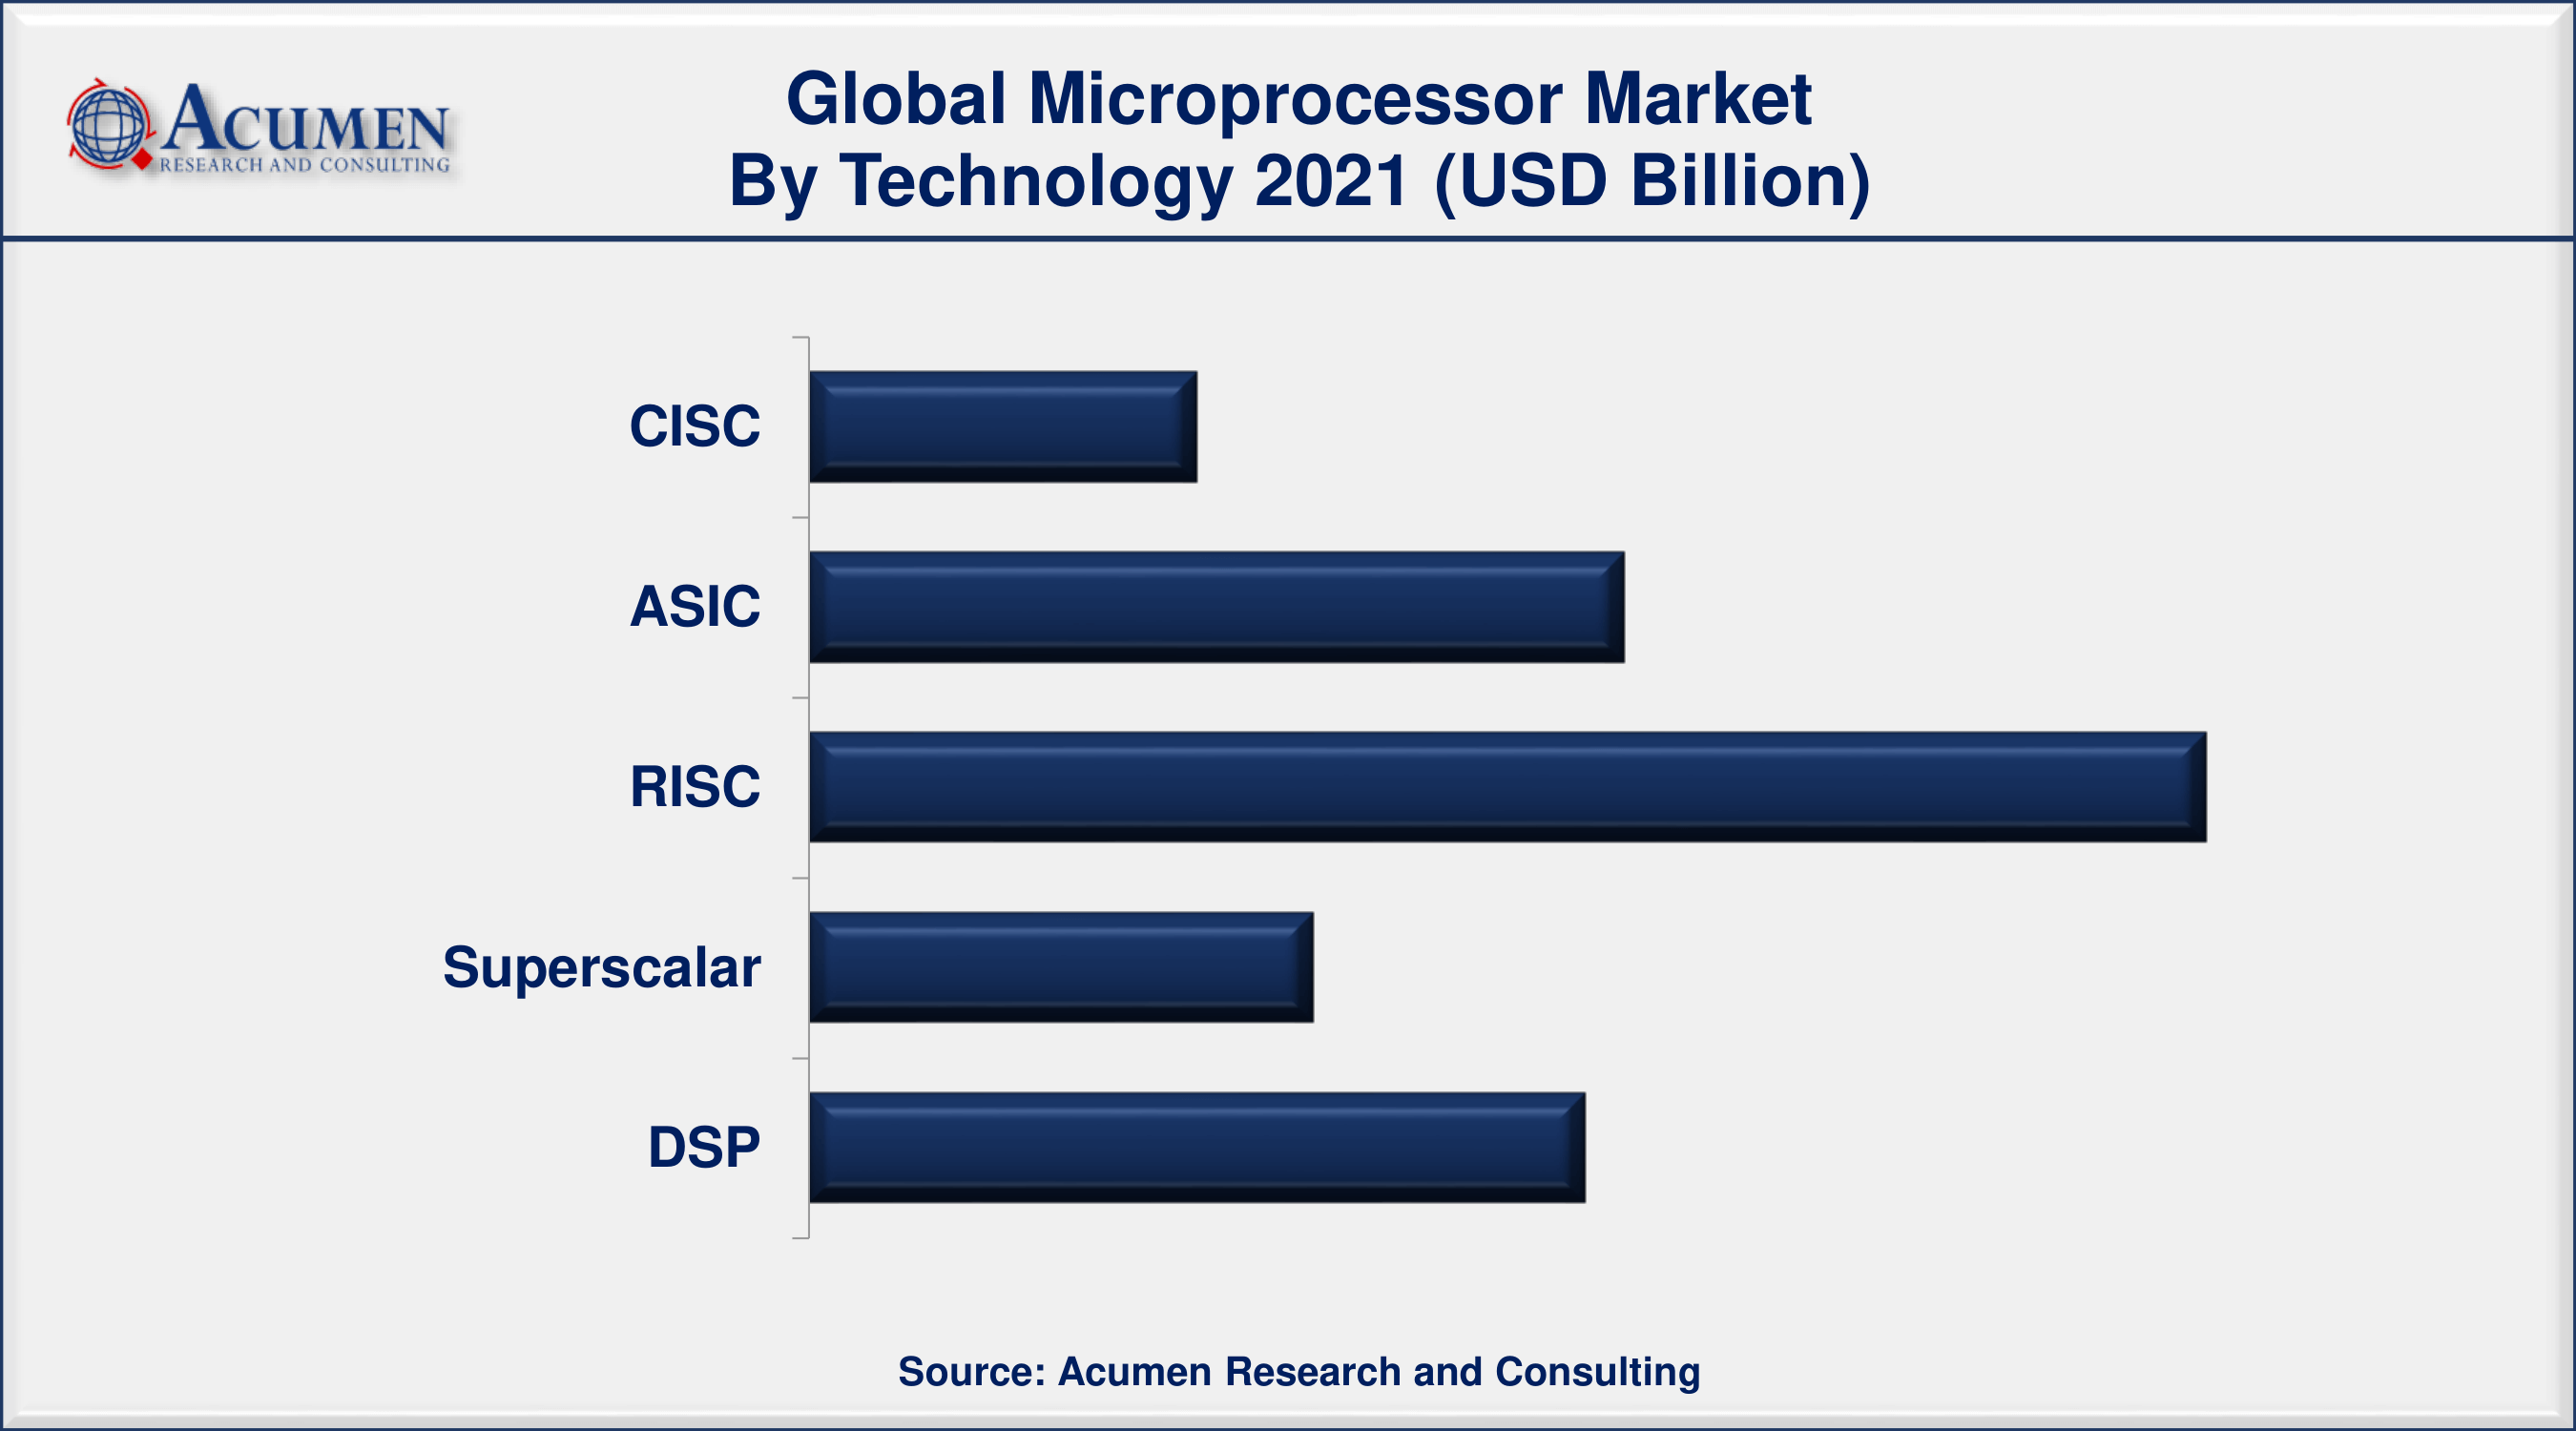 Based on technology, RISC segment accounted for over 36% of the overall market share in 2021